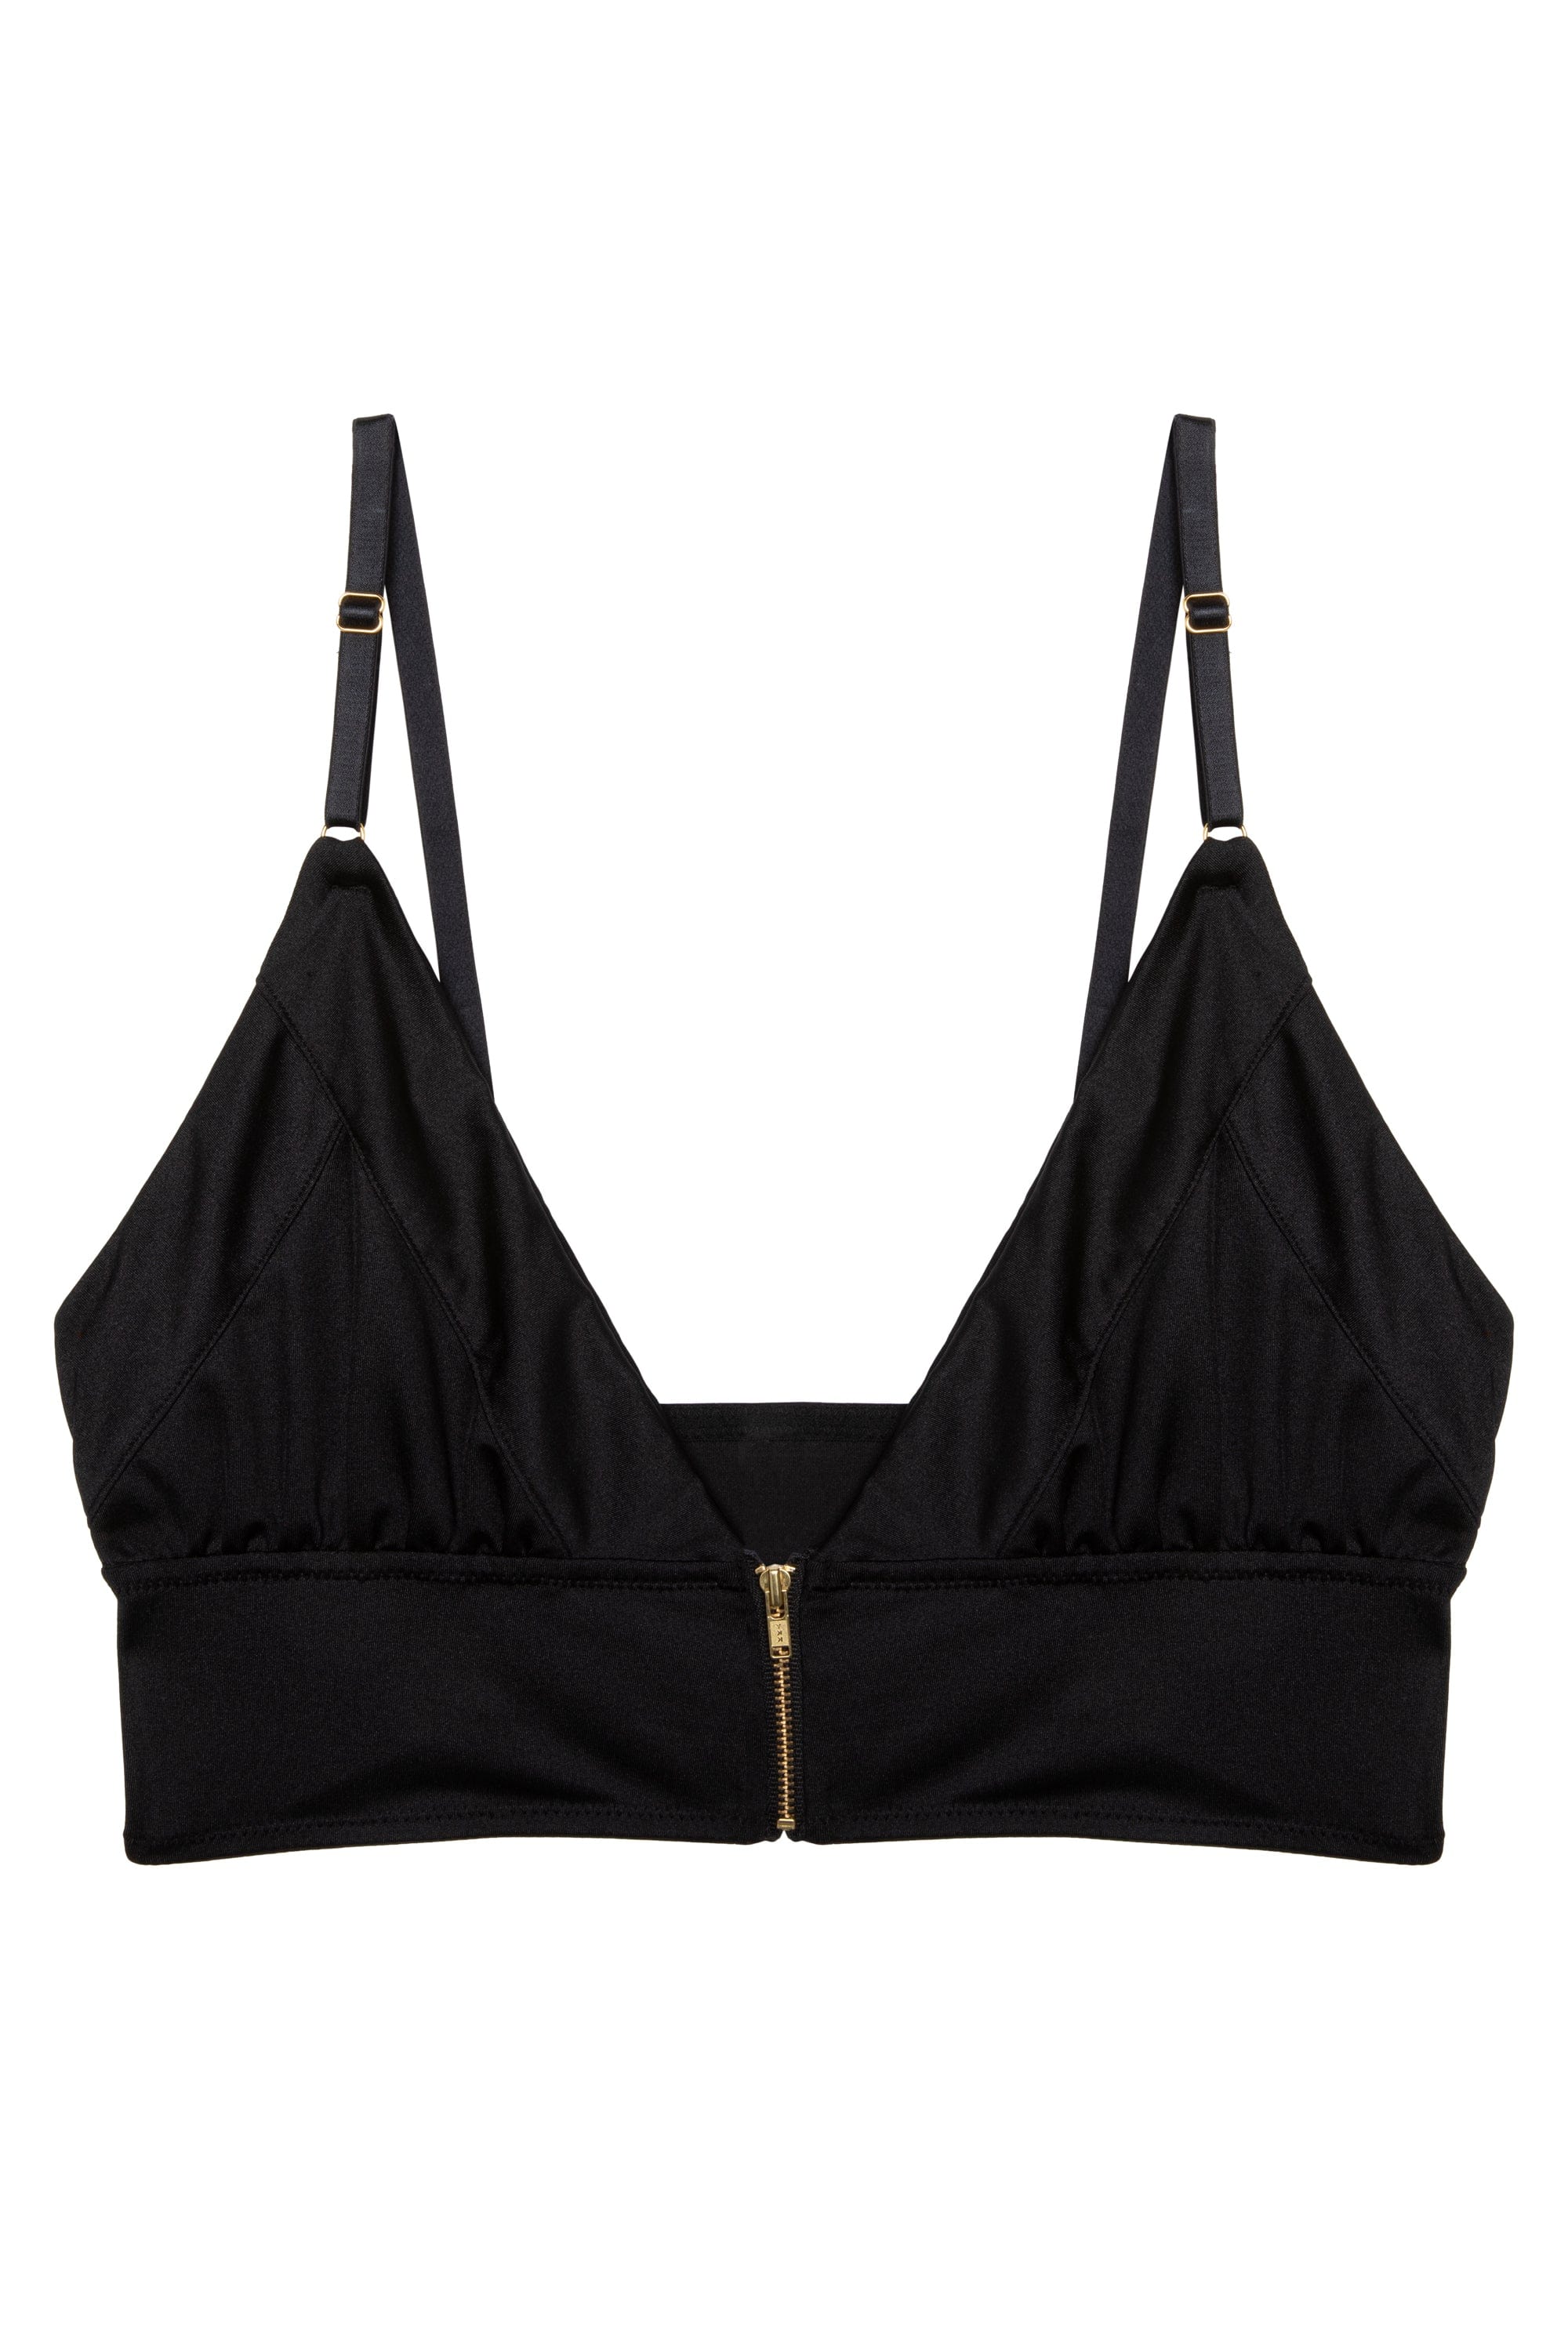 Buy Shoppy Villa Women's Polyamide, Nylon Spandex Lightly padded Wired  Sports Bra (1583 black_Black_Free Size) Online In India At Discounted Prices